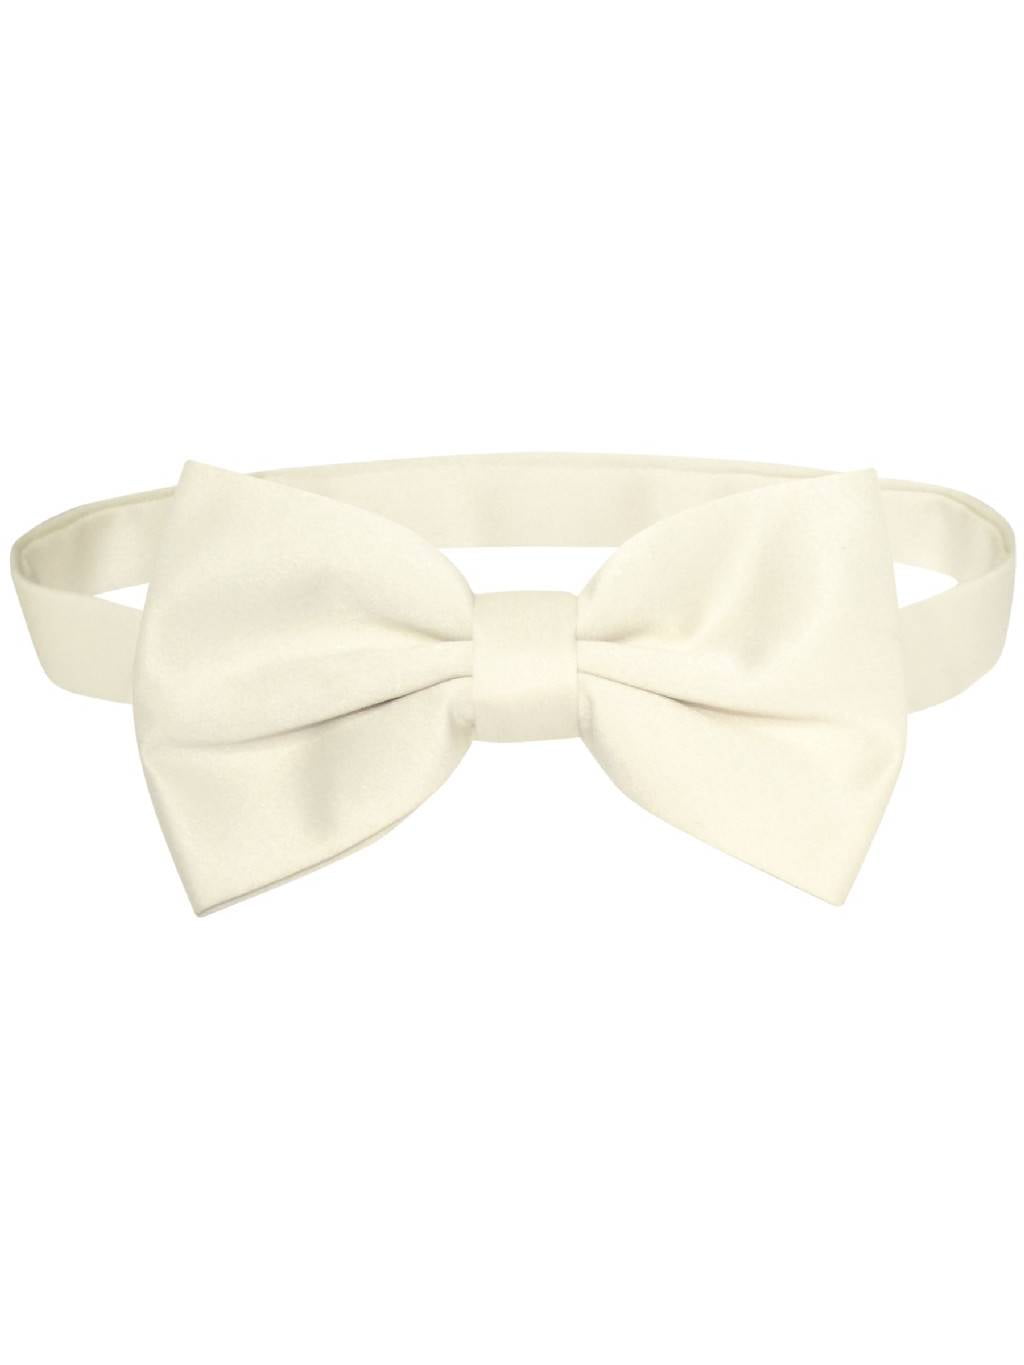 Classic Gift Wedding Tuxedo Suits Satin Bow Ties from Boy Baby Toddle Kid to Men 